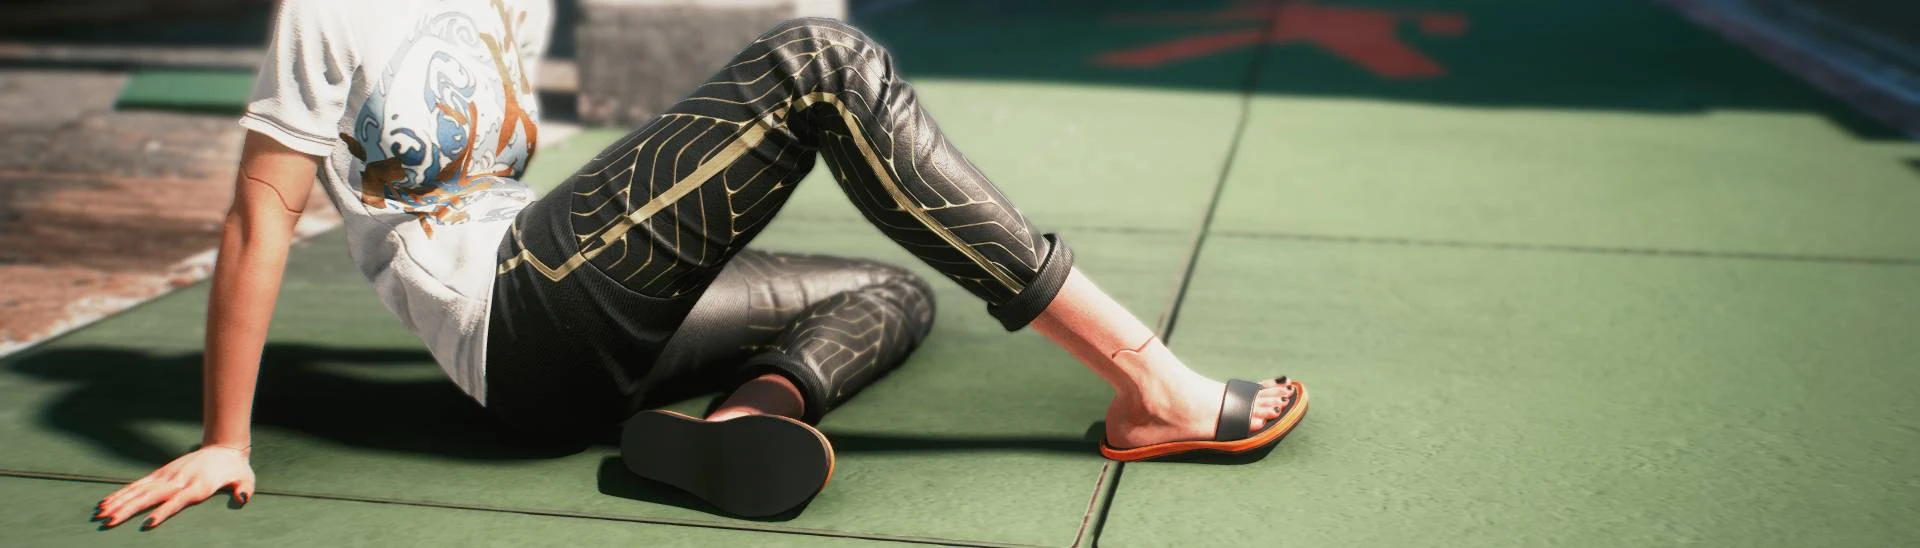 Sandals for V at Cyberpunk 2077 Nexus - Mods and community